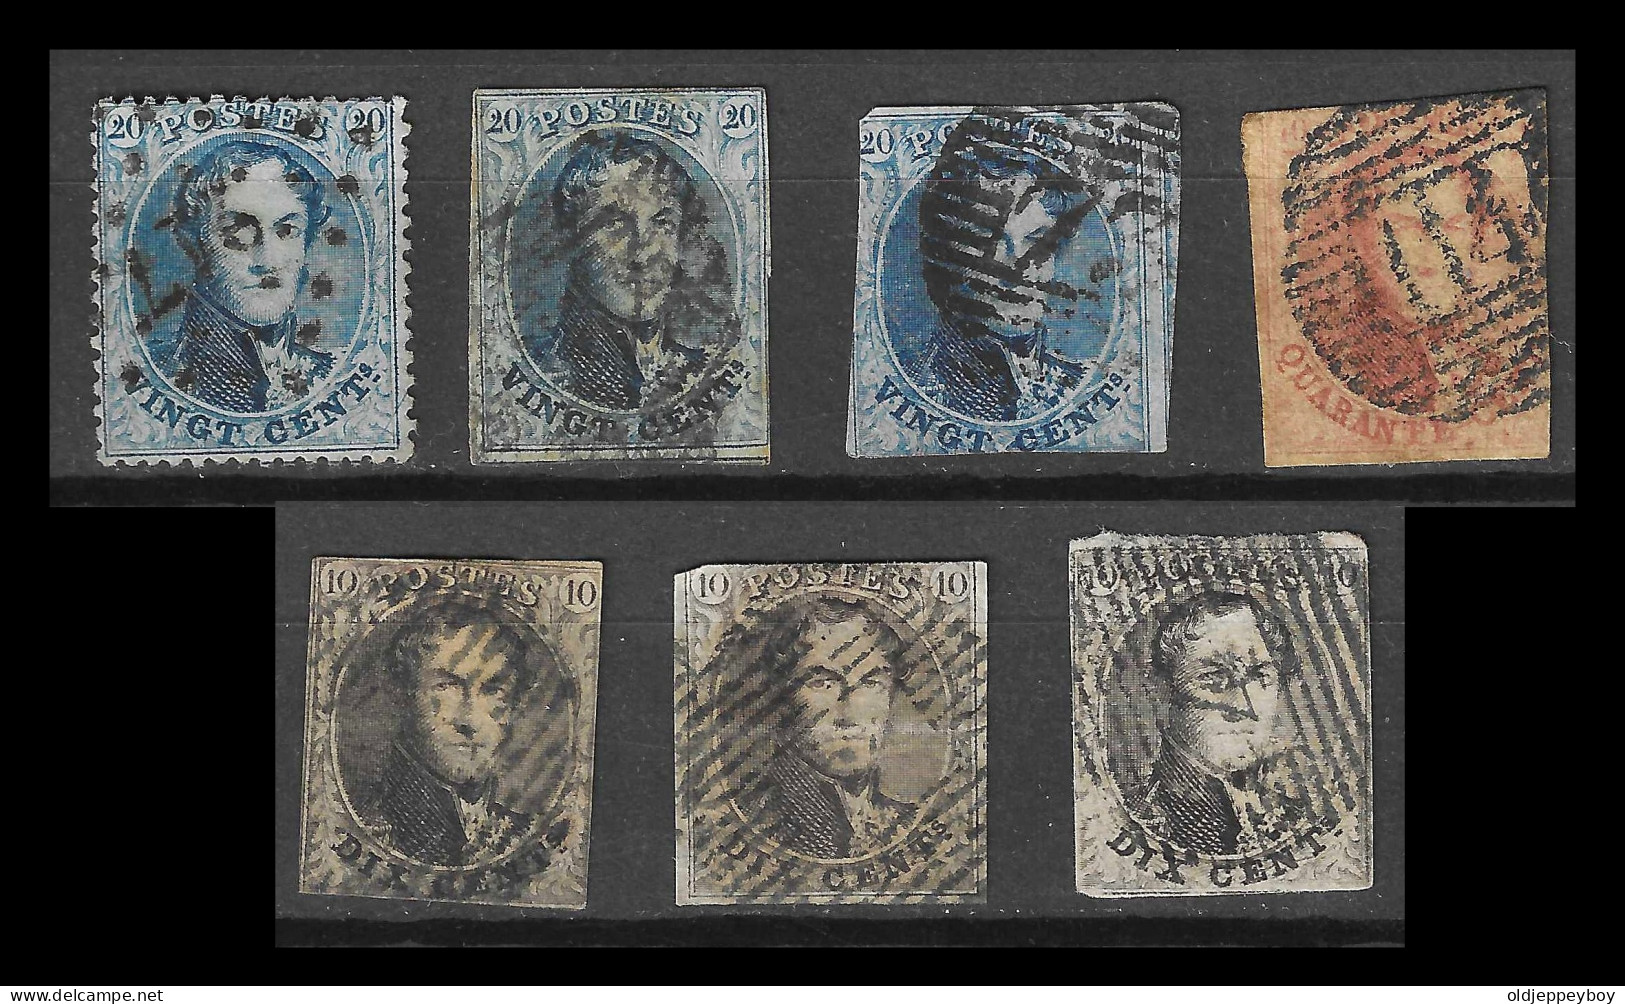 1851 TO 1861 TimbreS BELGIUM MOSTLY IMPERF LESS 1  - Dagbladzegels